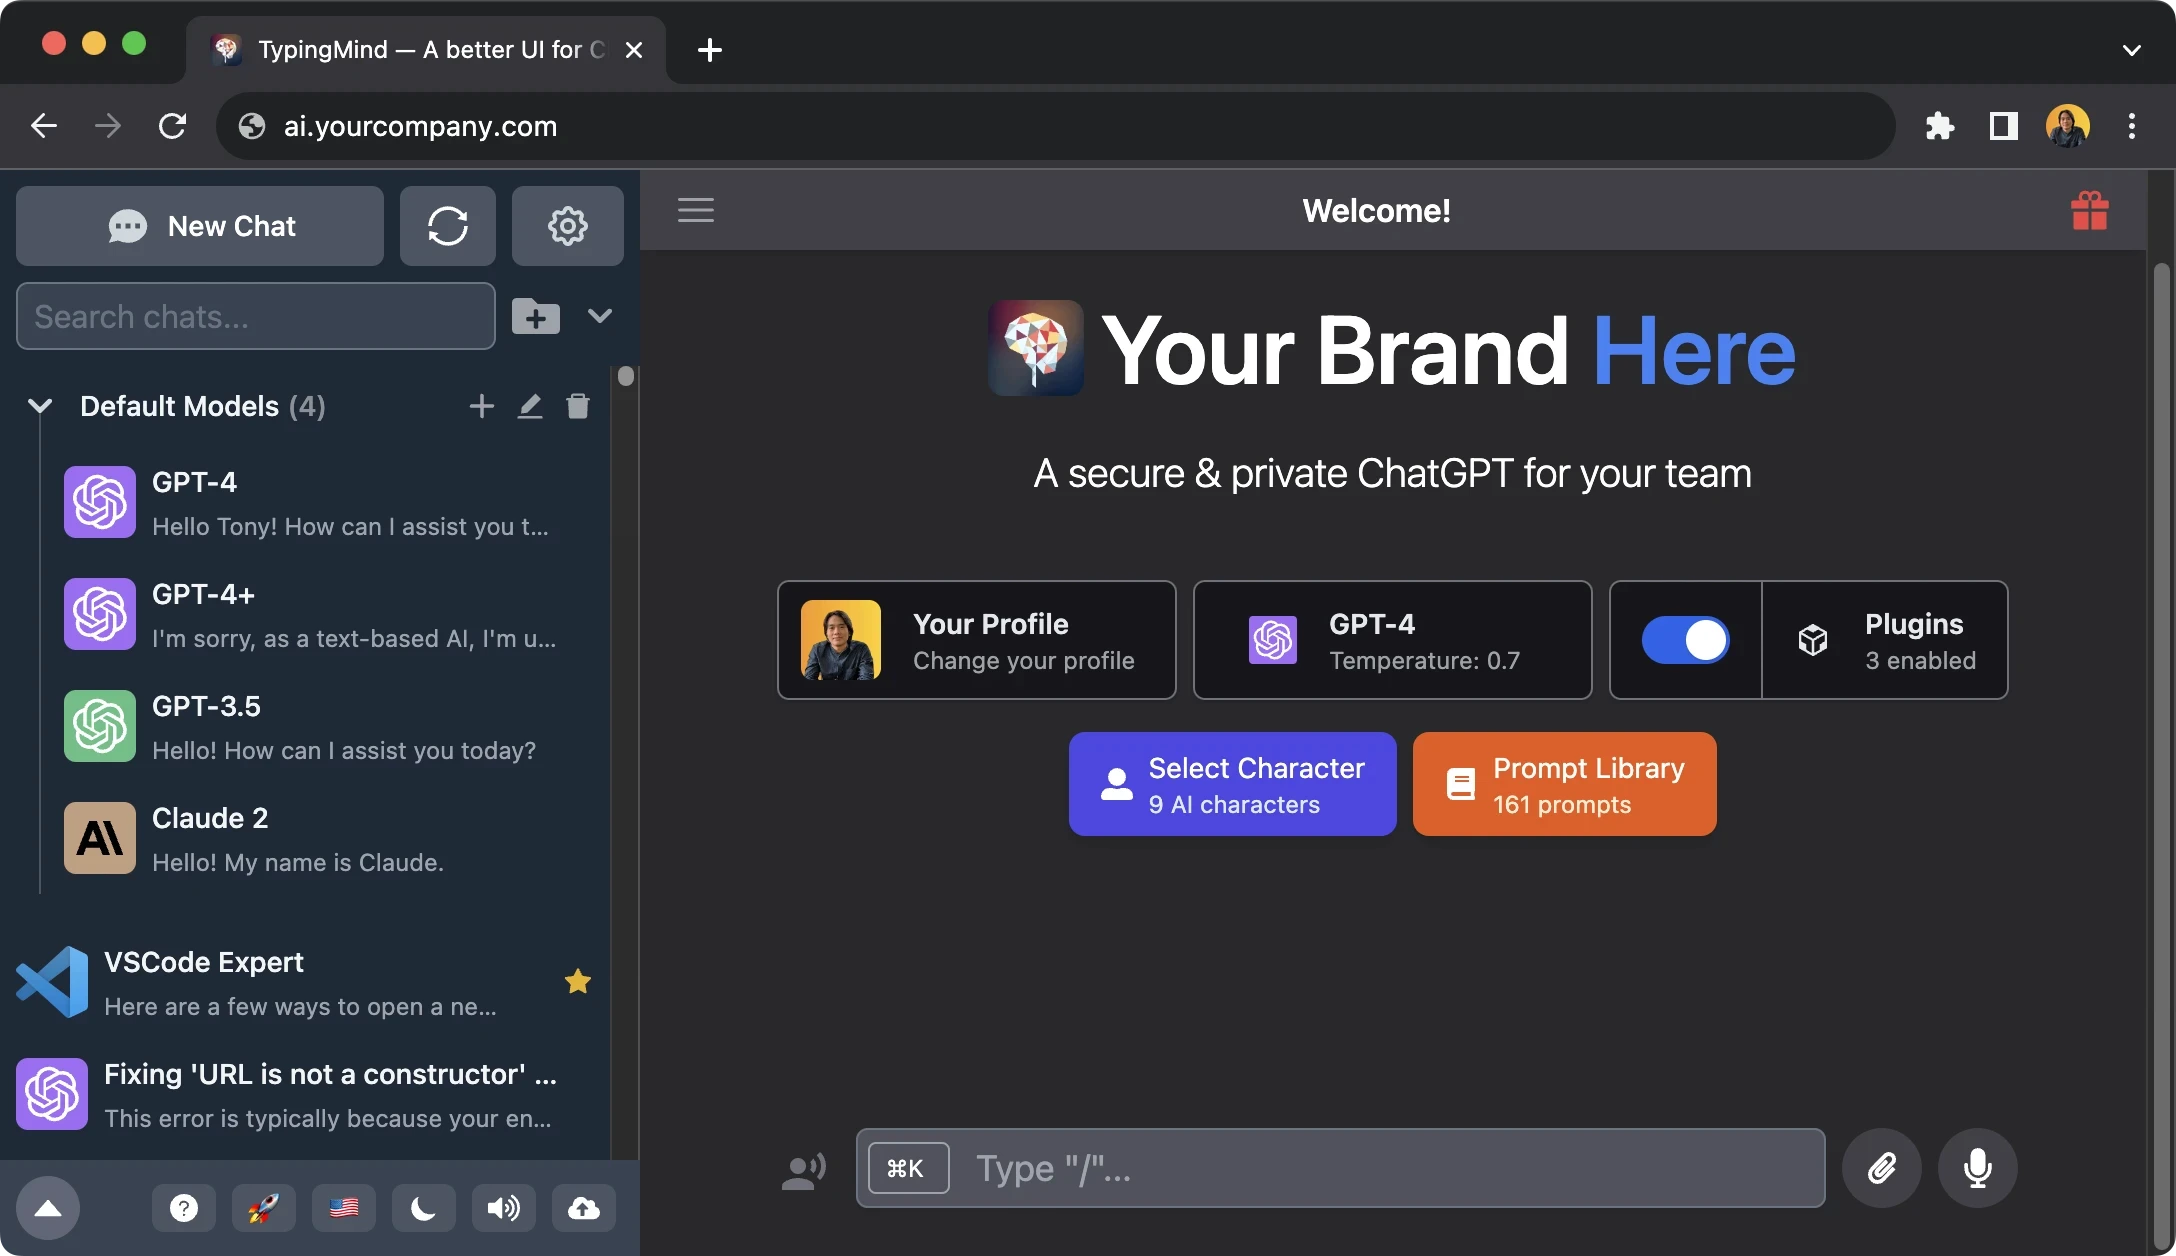 Personalize your chat instance to match your brand identity